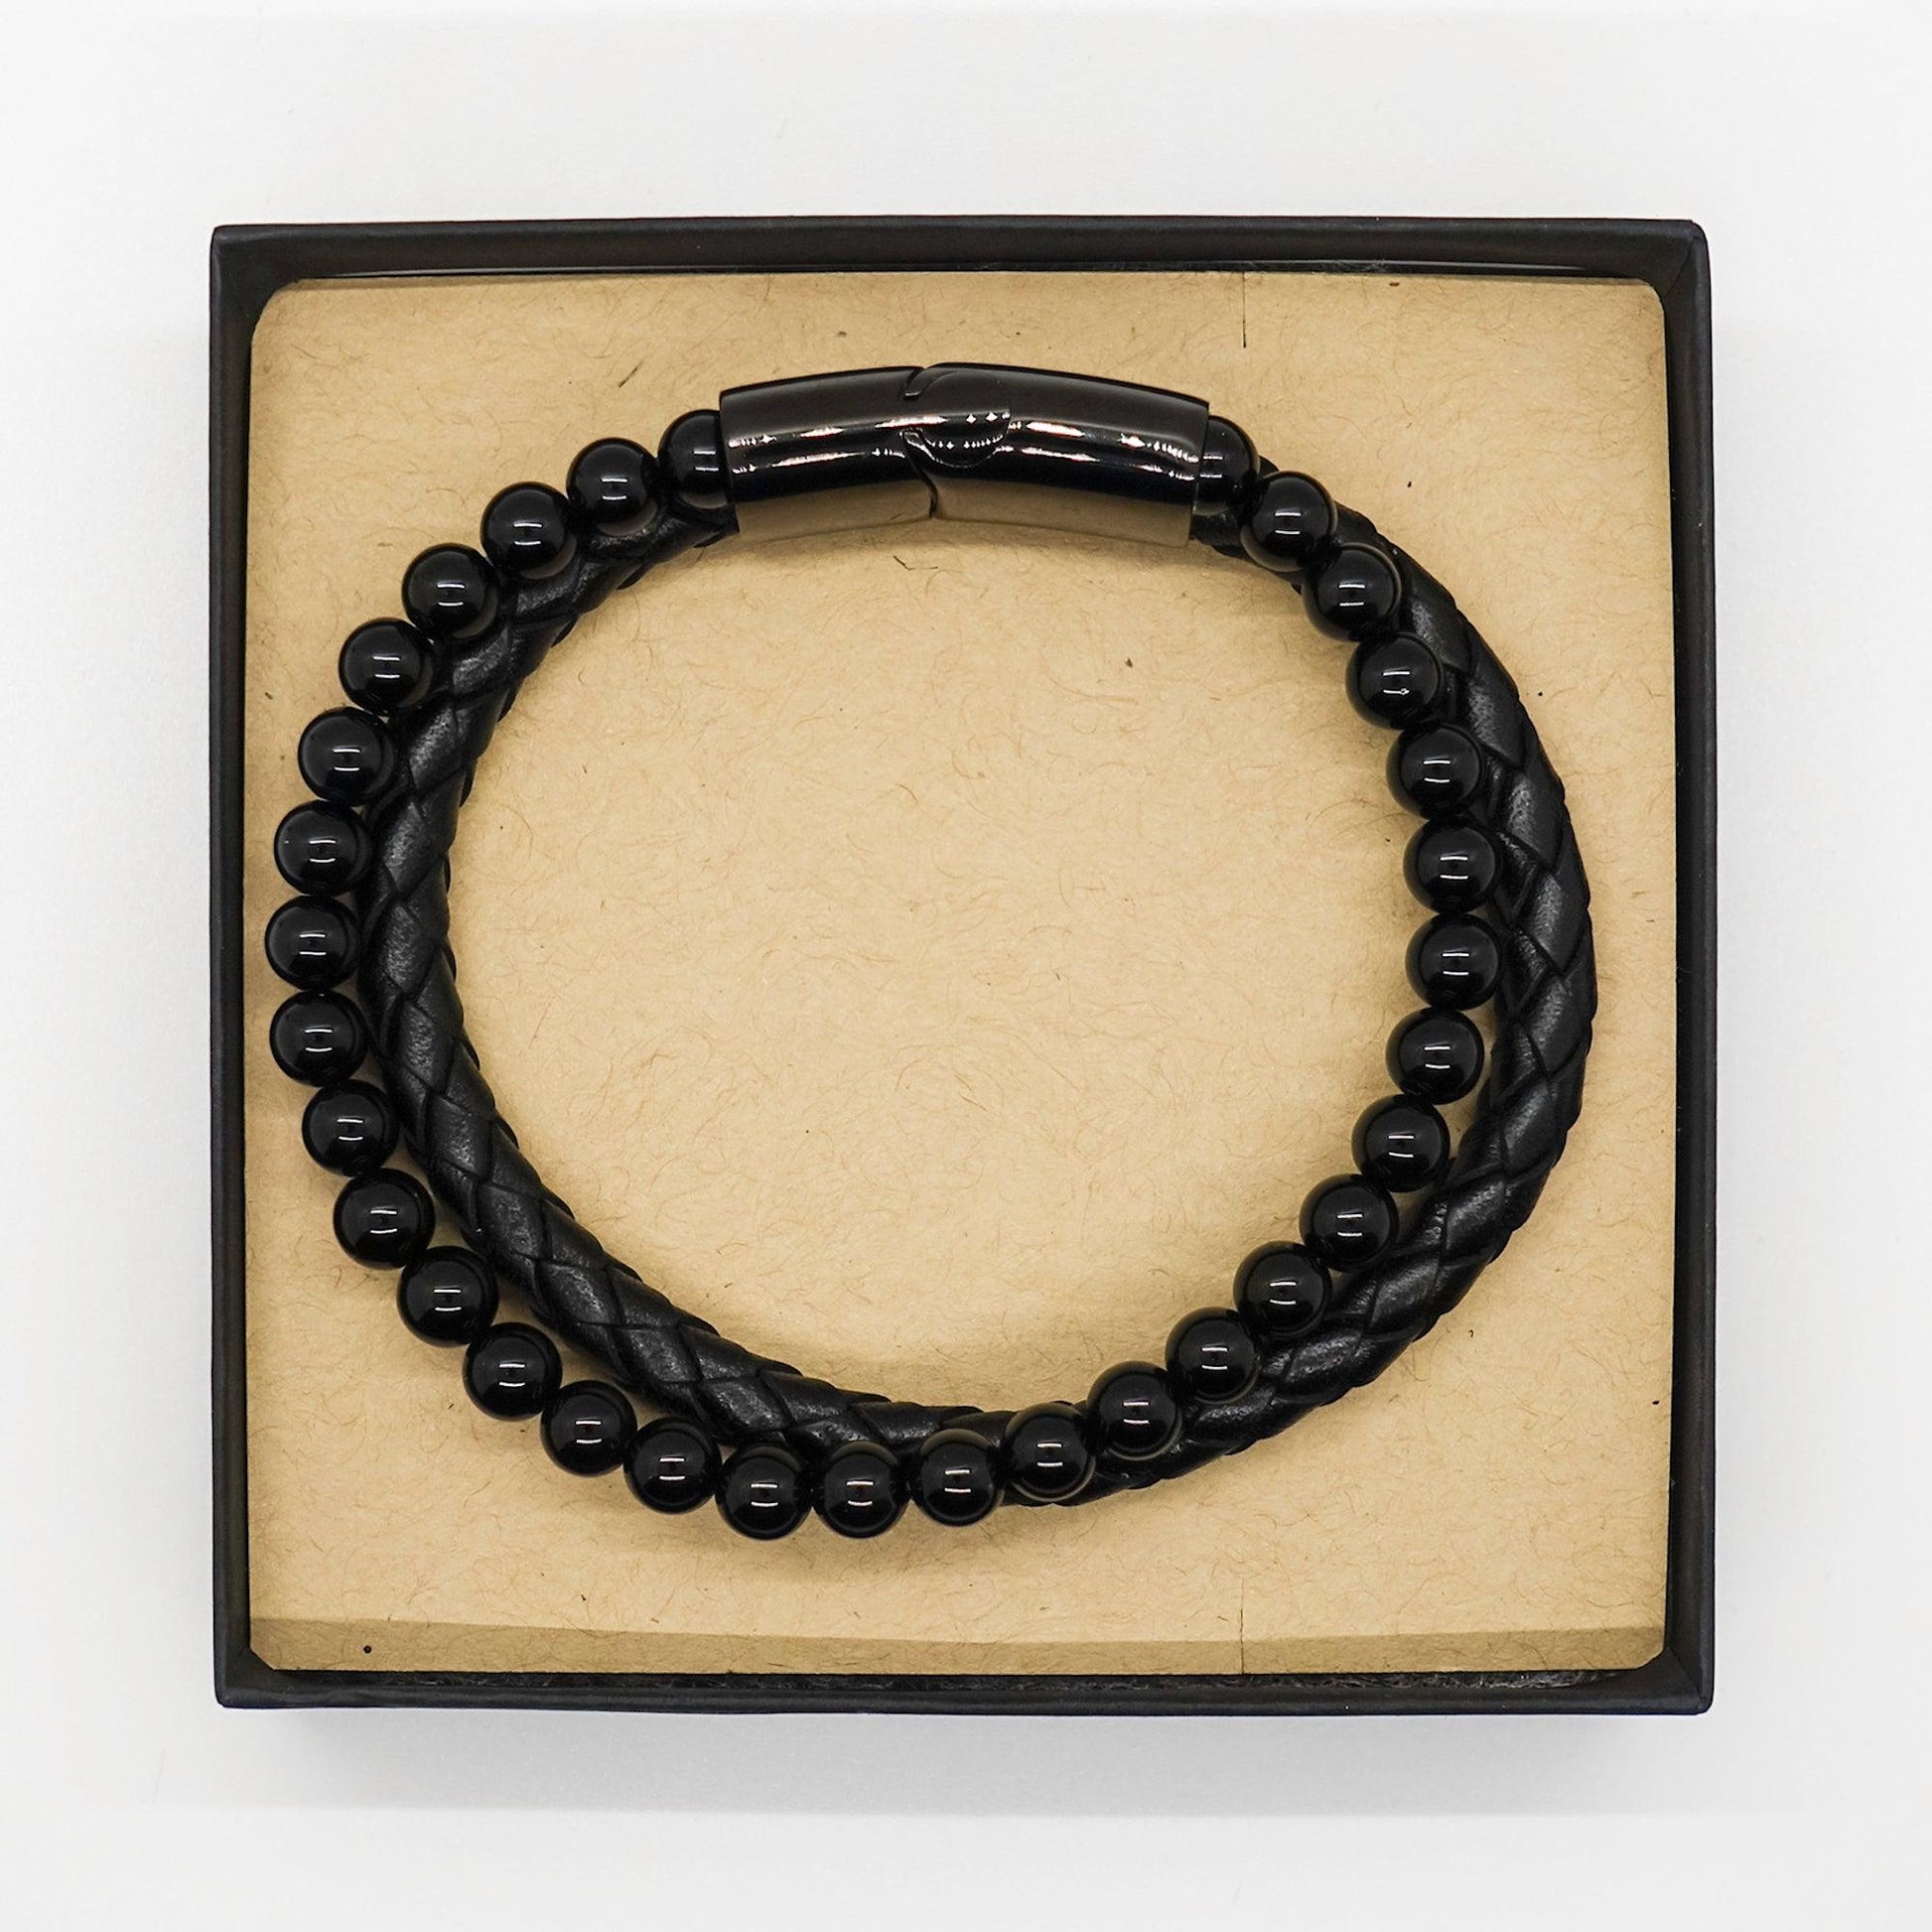 Interior Designer Black Braided Leather Stone Bracelet - Thanks for being who you are - Birthday Christmas Jewelry Gifts Coworkers Colleague Boss - Mallard Moon Gift Shop